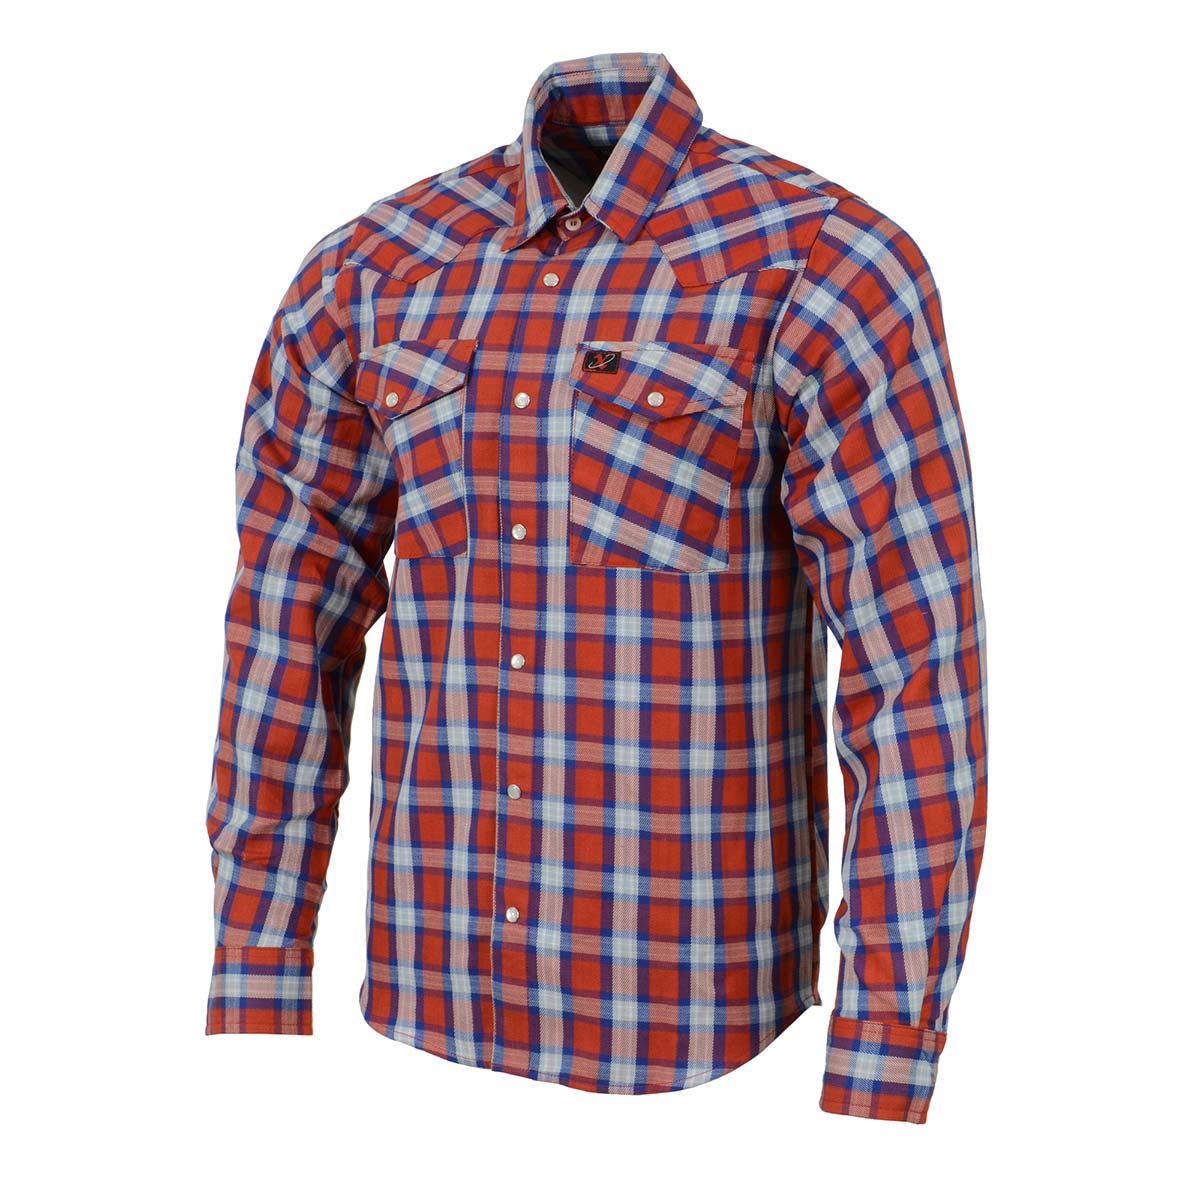 Men's Red and Blue with White Long Sleeve Cotton Flannel Shirt